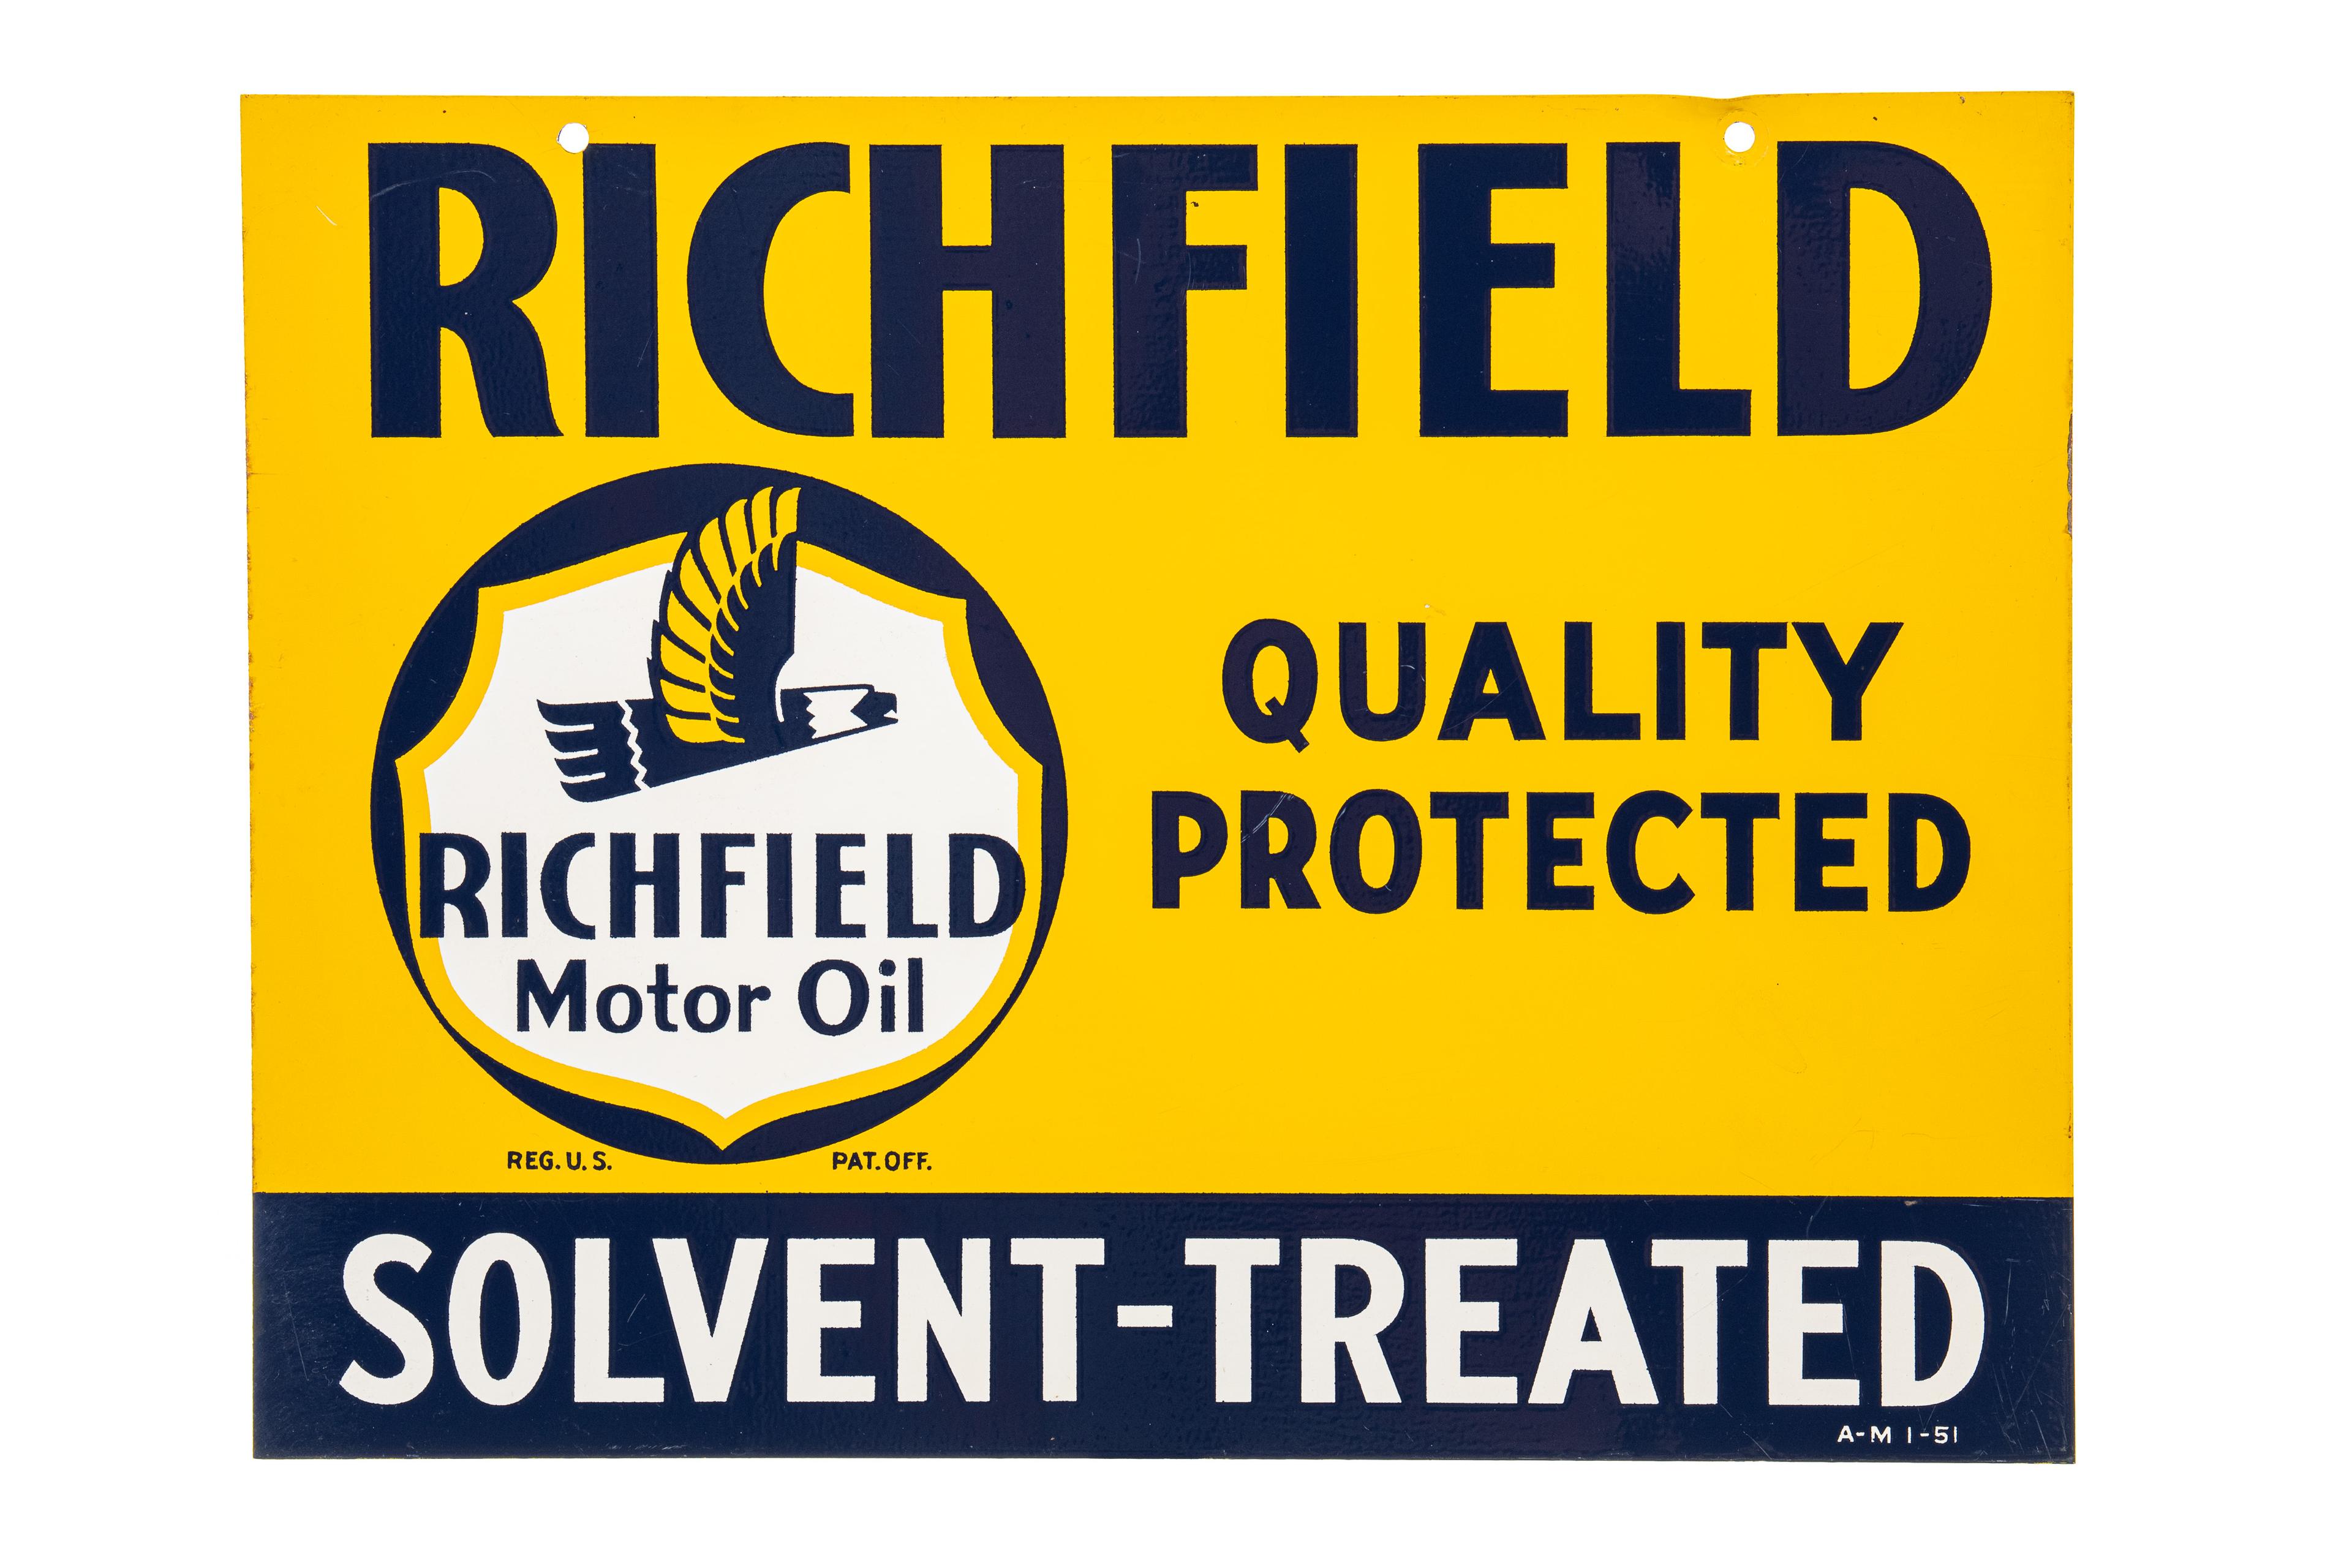 Richfield Solvent-treated Hanging Sign